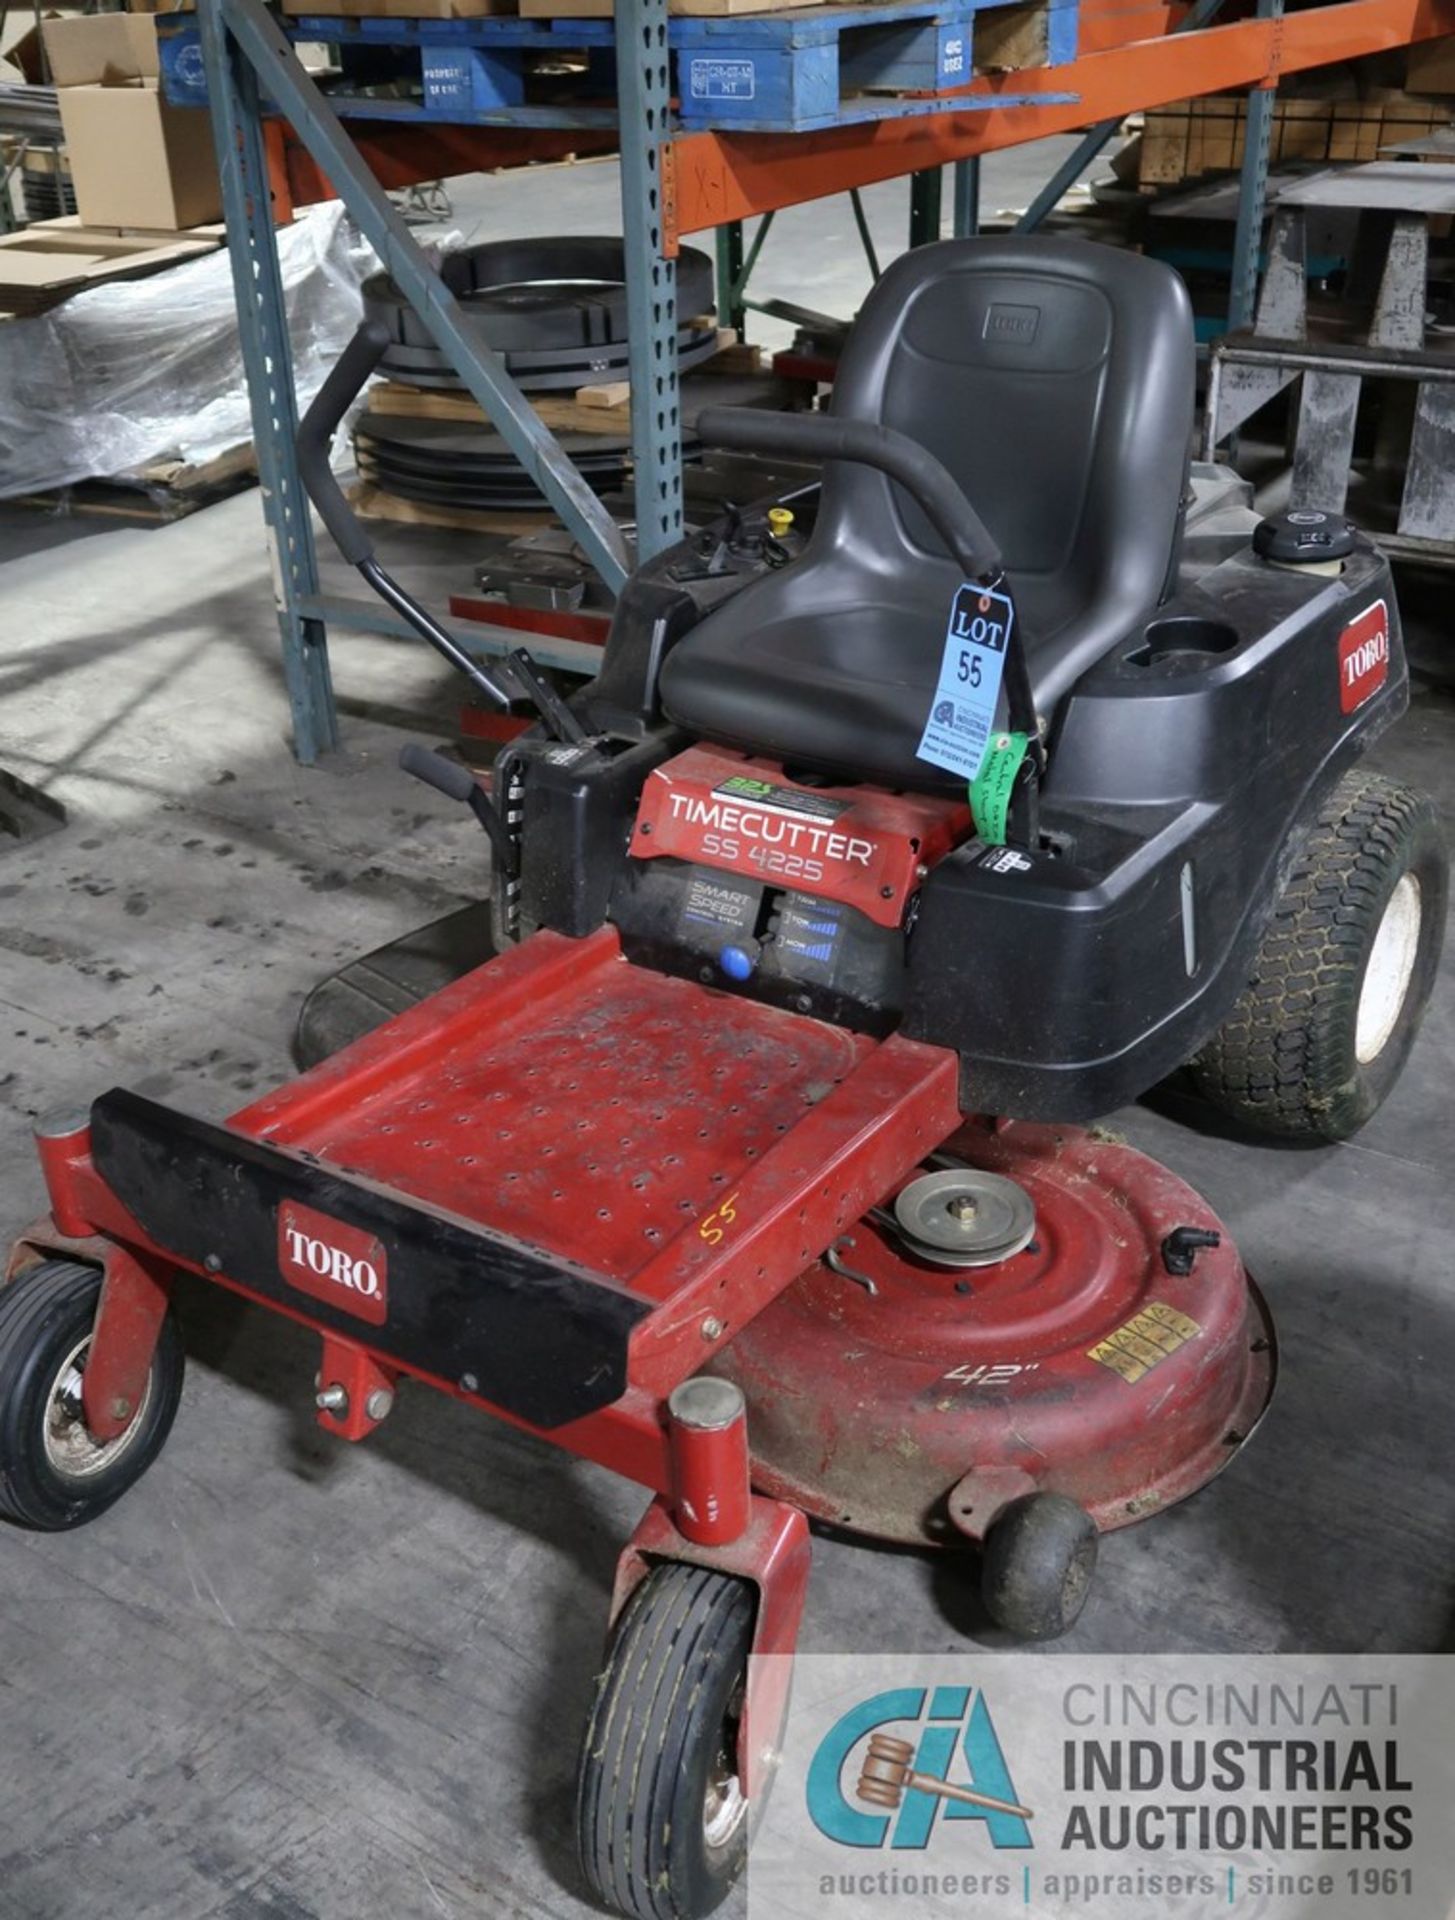 42" TORO TIME CUTTER MODEL SS4225, 22.5 TWIN V GAS POWERED COMMERCIAL ZERO TURN MOWER - Image 2 of 4